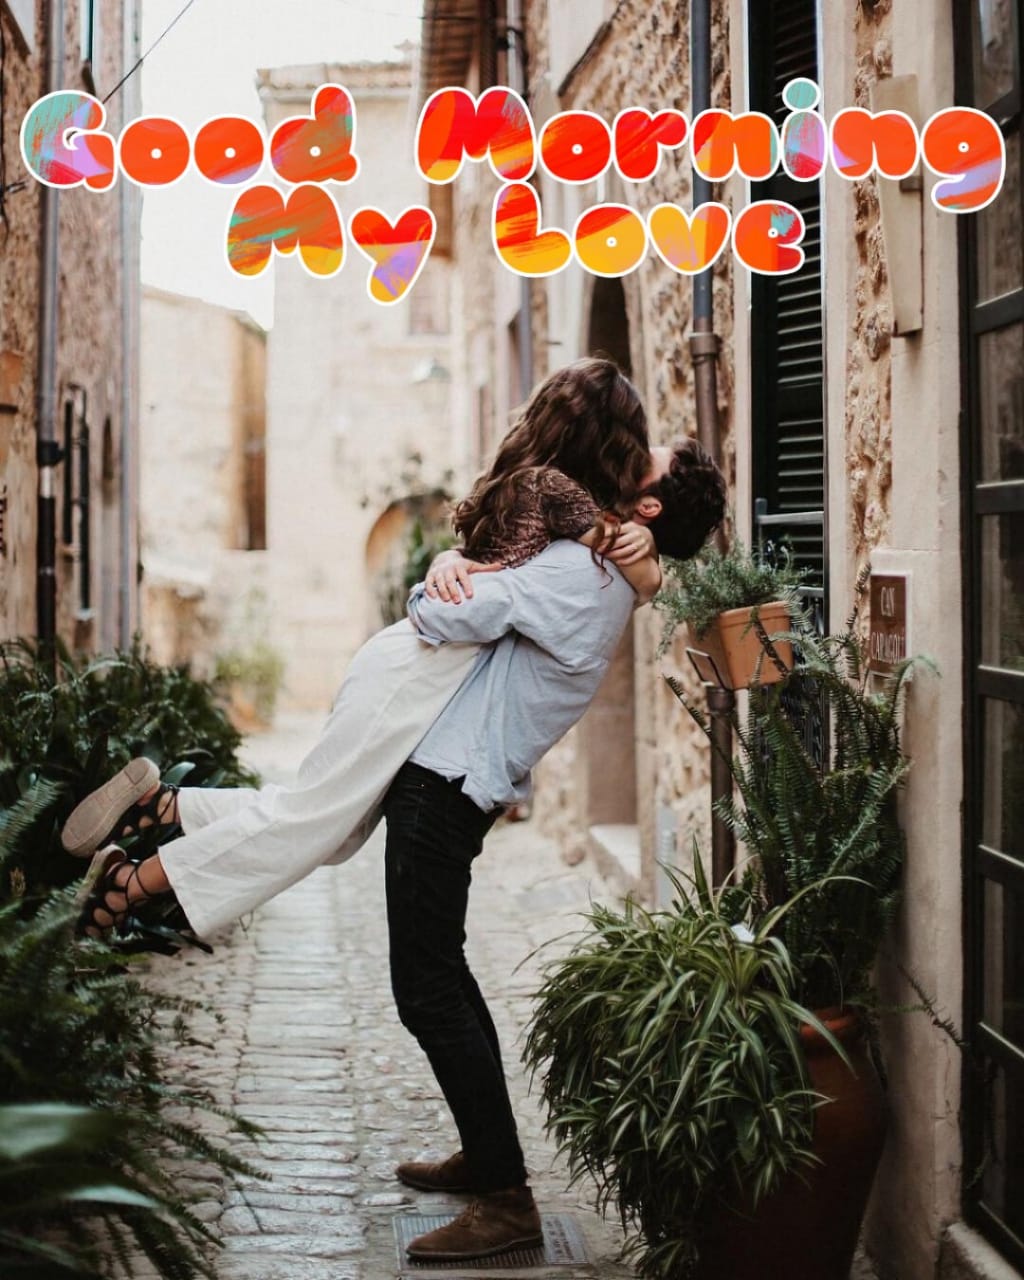 Good Morning My Love Images Wallpapers Download - Love , HD Wallpaper & Backgrounds